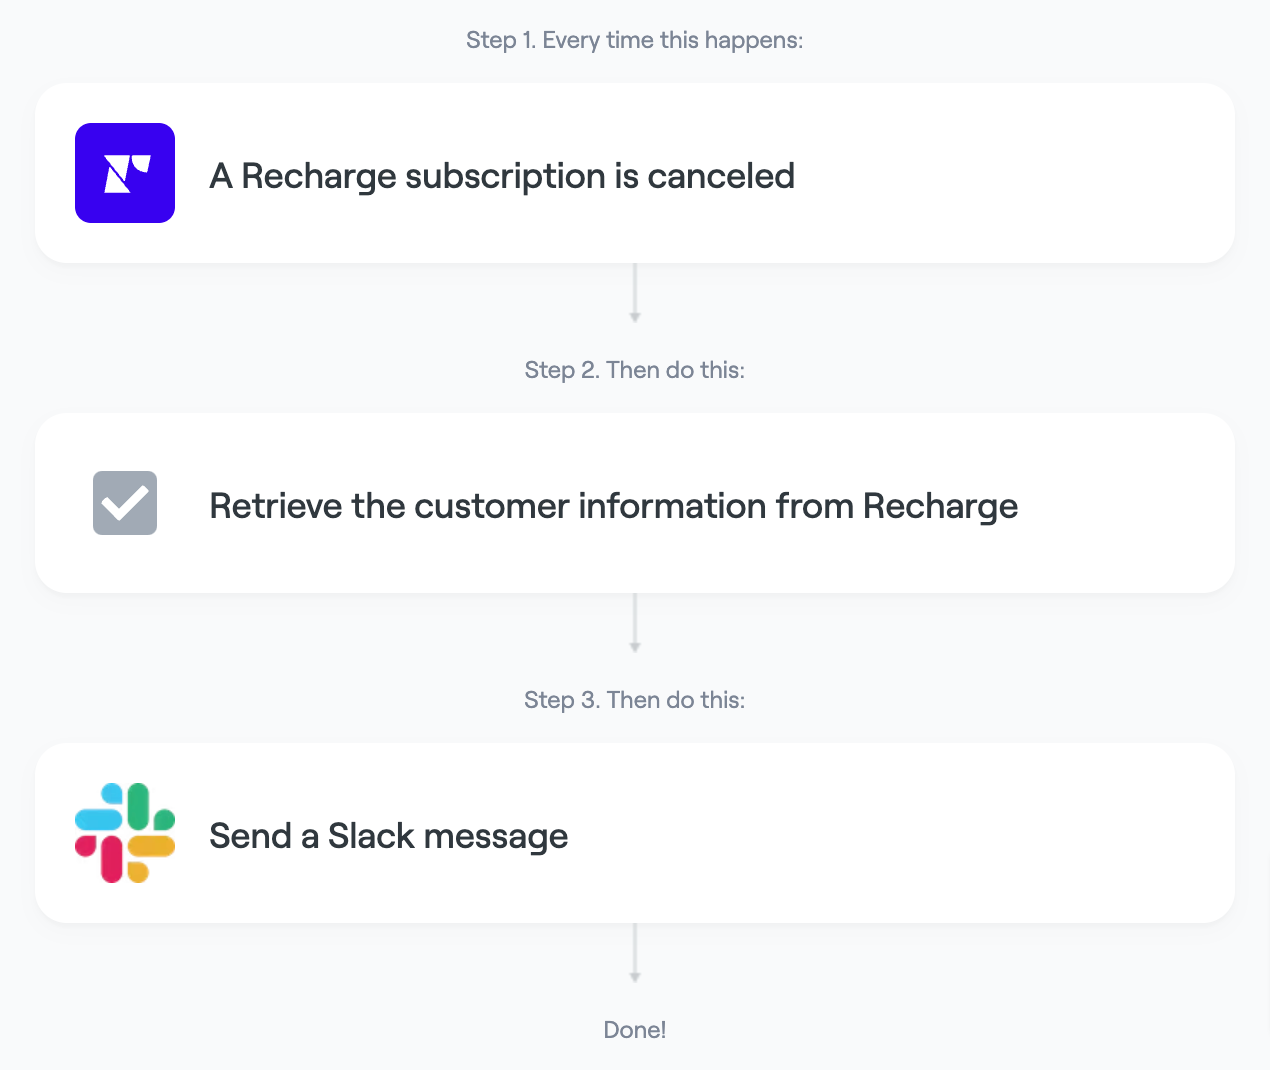 Send a Slack message when a customer cancels their subscription in Recharge